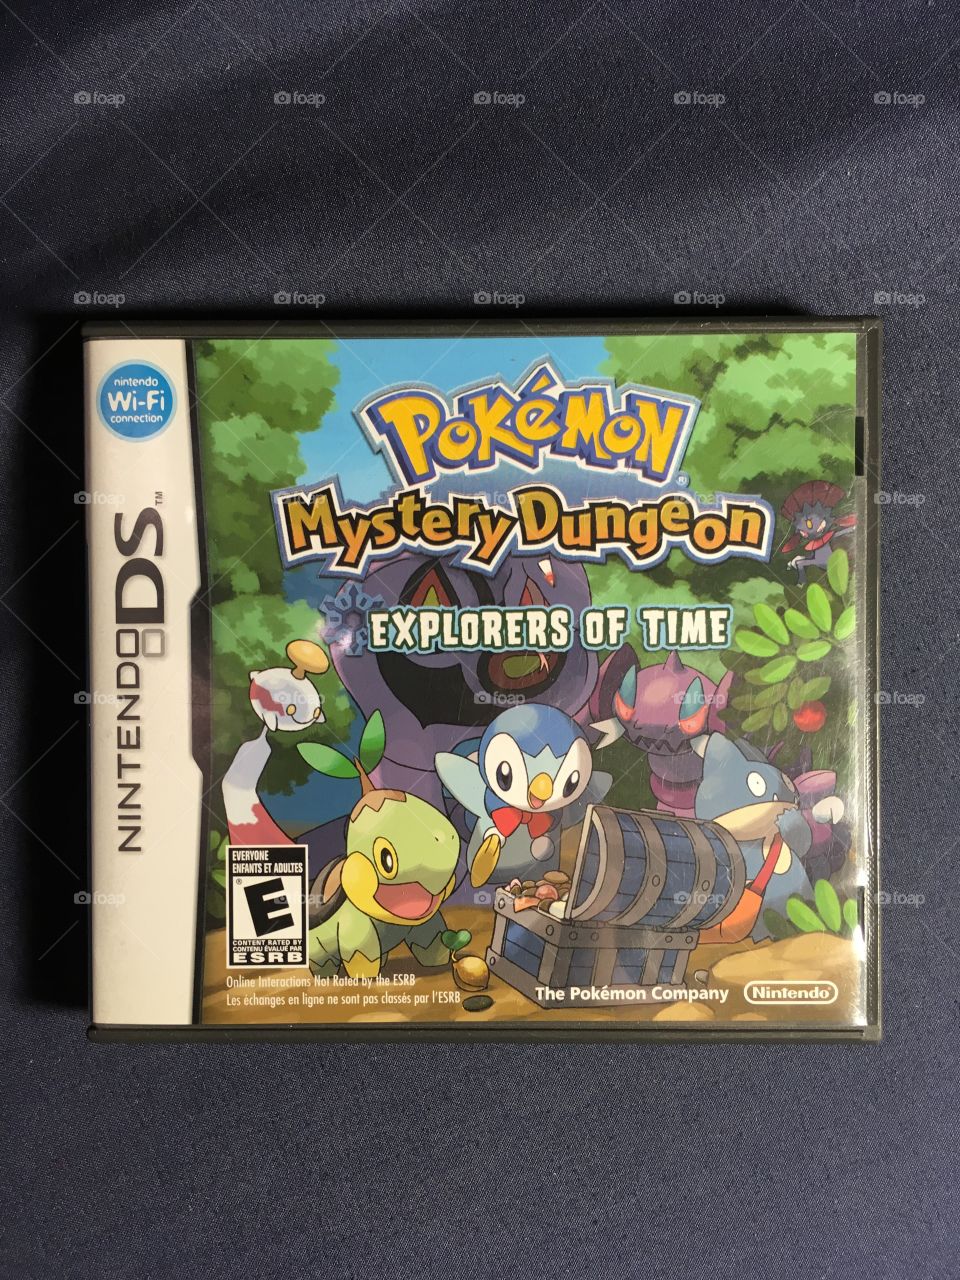 Pokémon Mystery Dungeon Explorers of Time video game for the Nintendo DS - released 2008